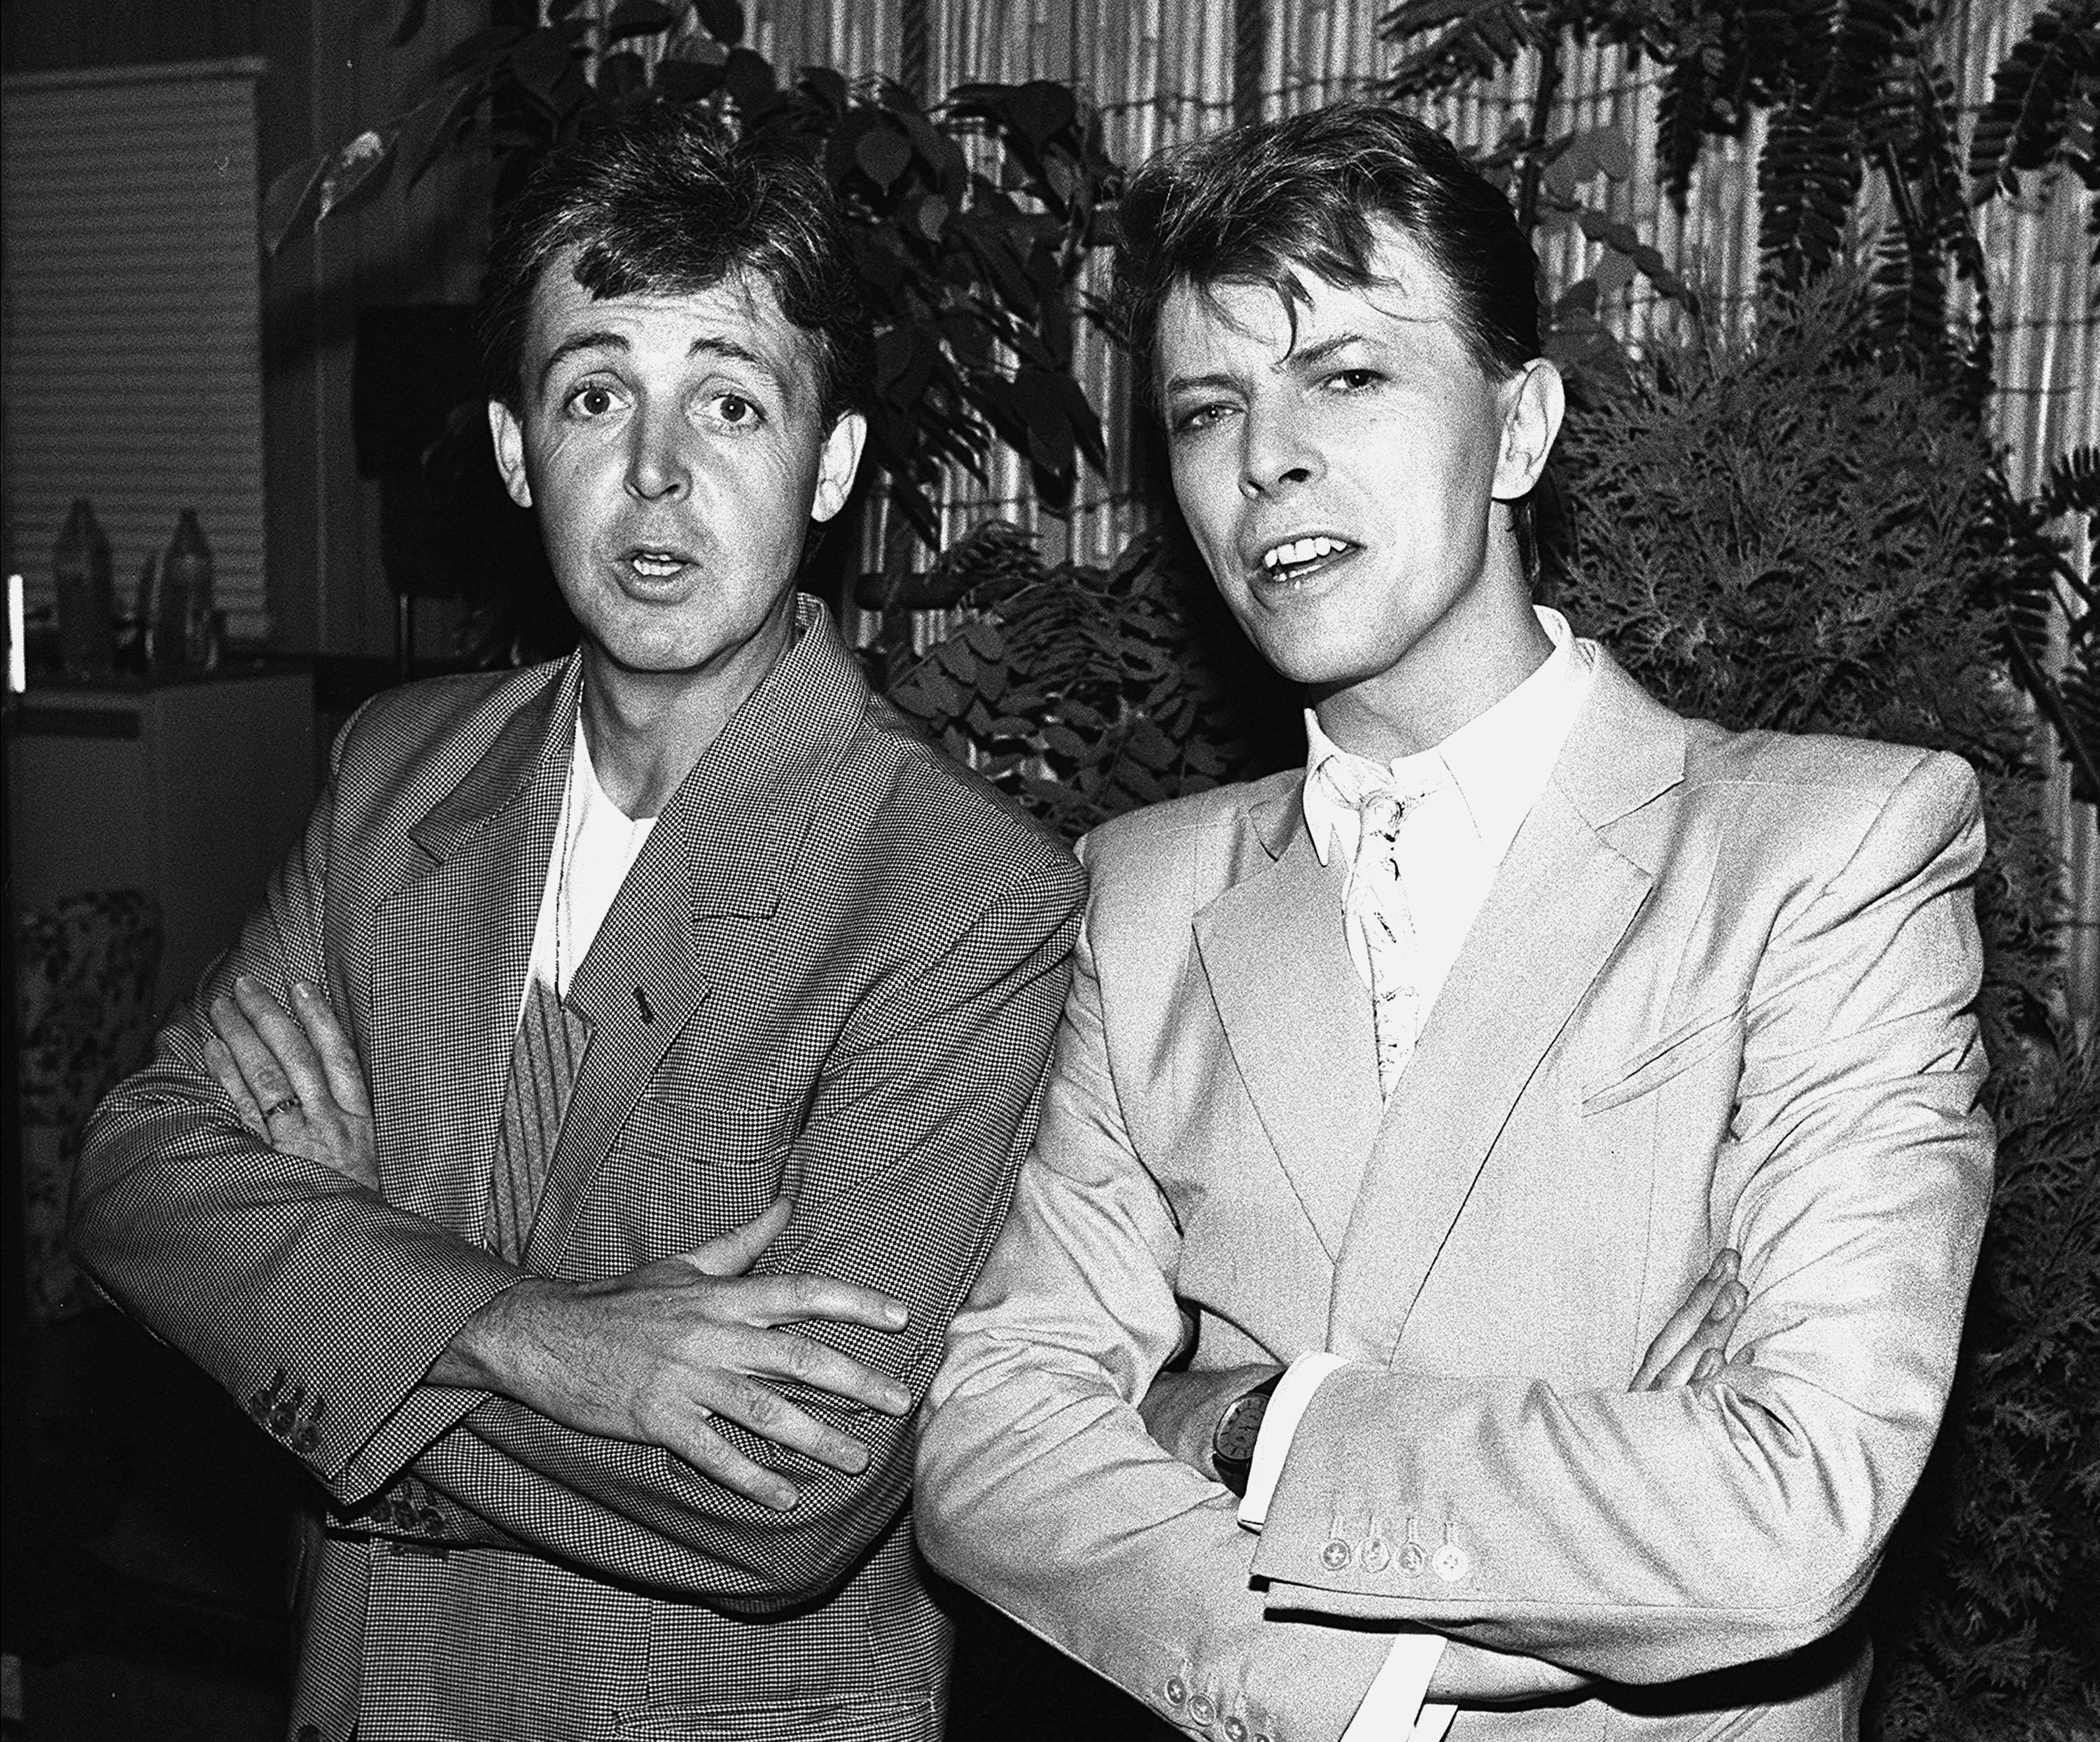 Paul McCartney and "Let's Dance" singer David Bowie in suits